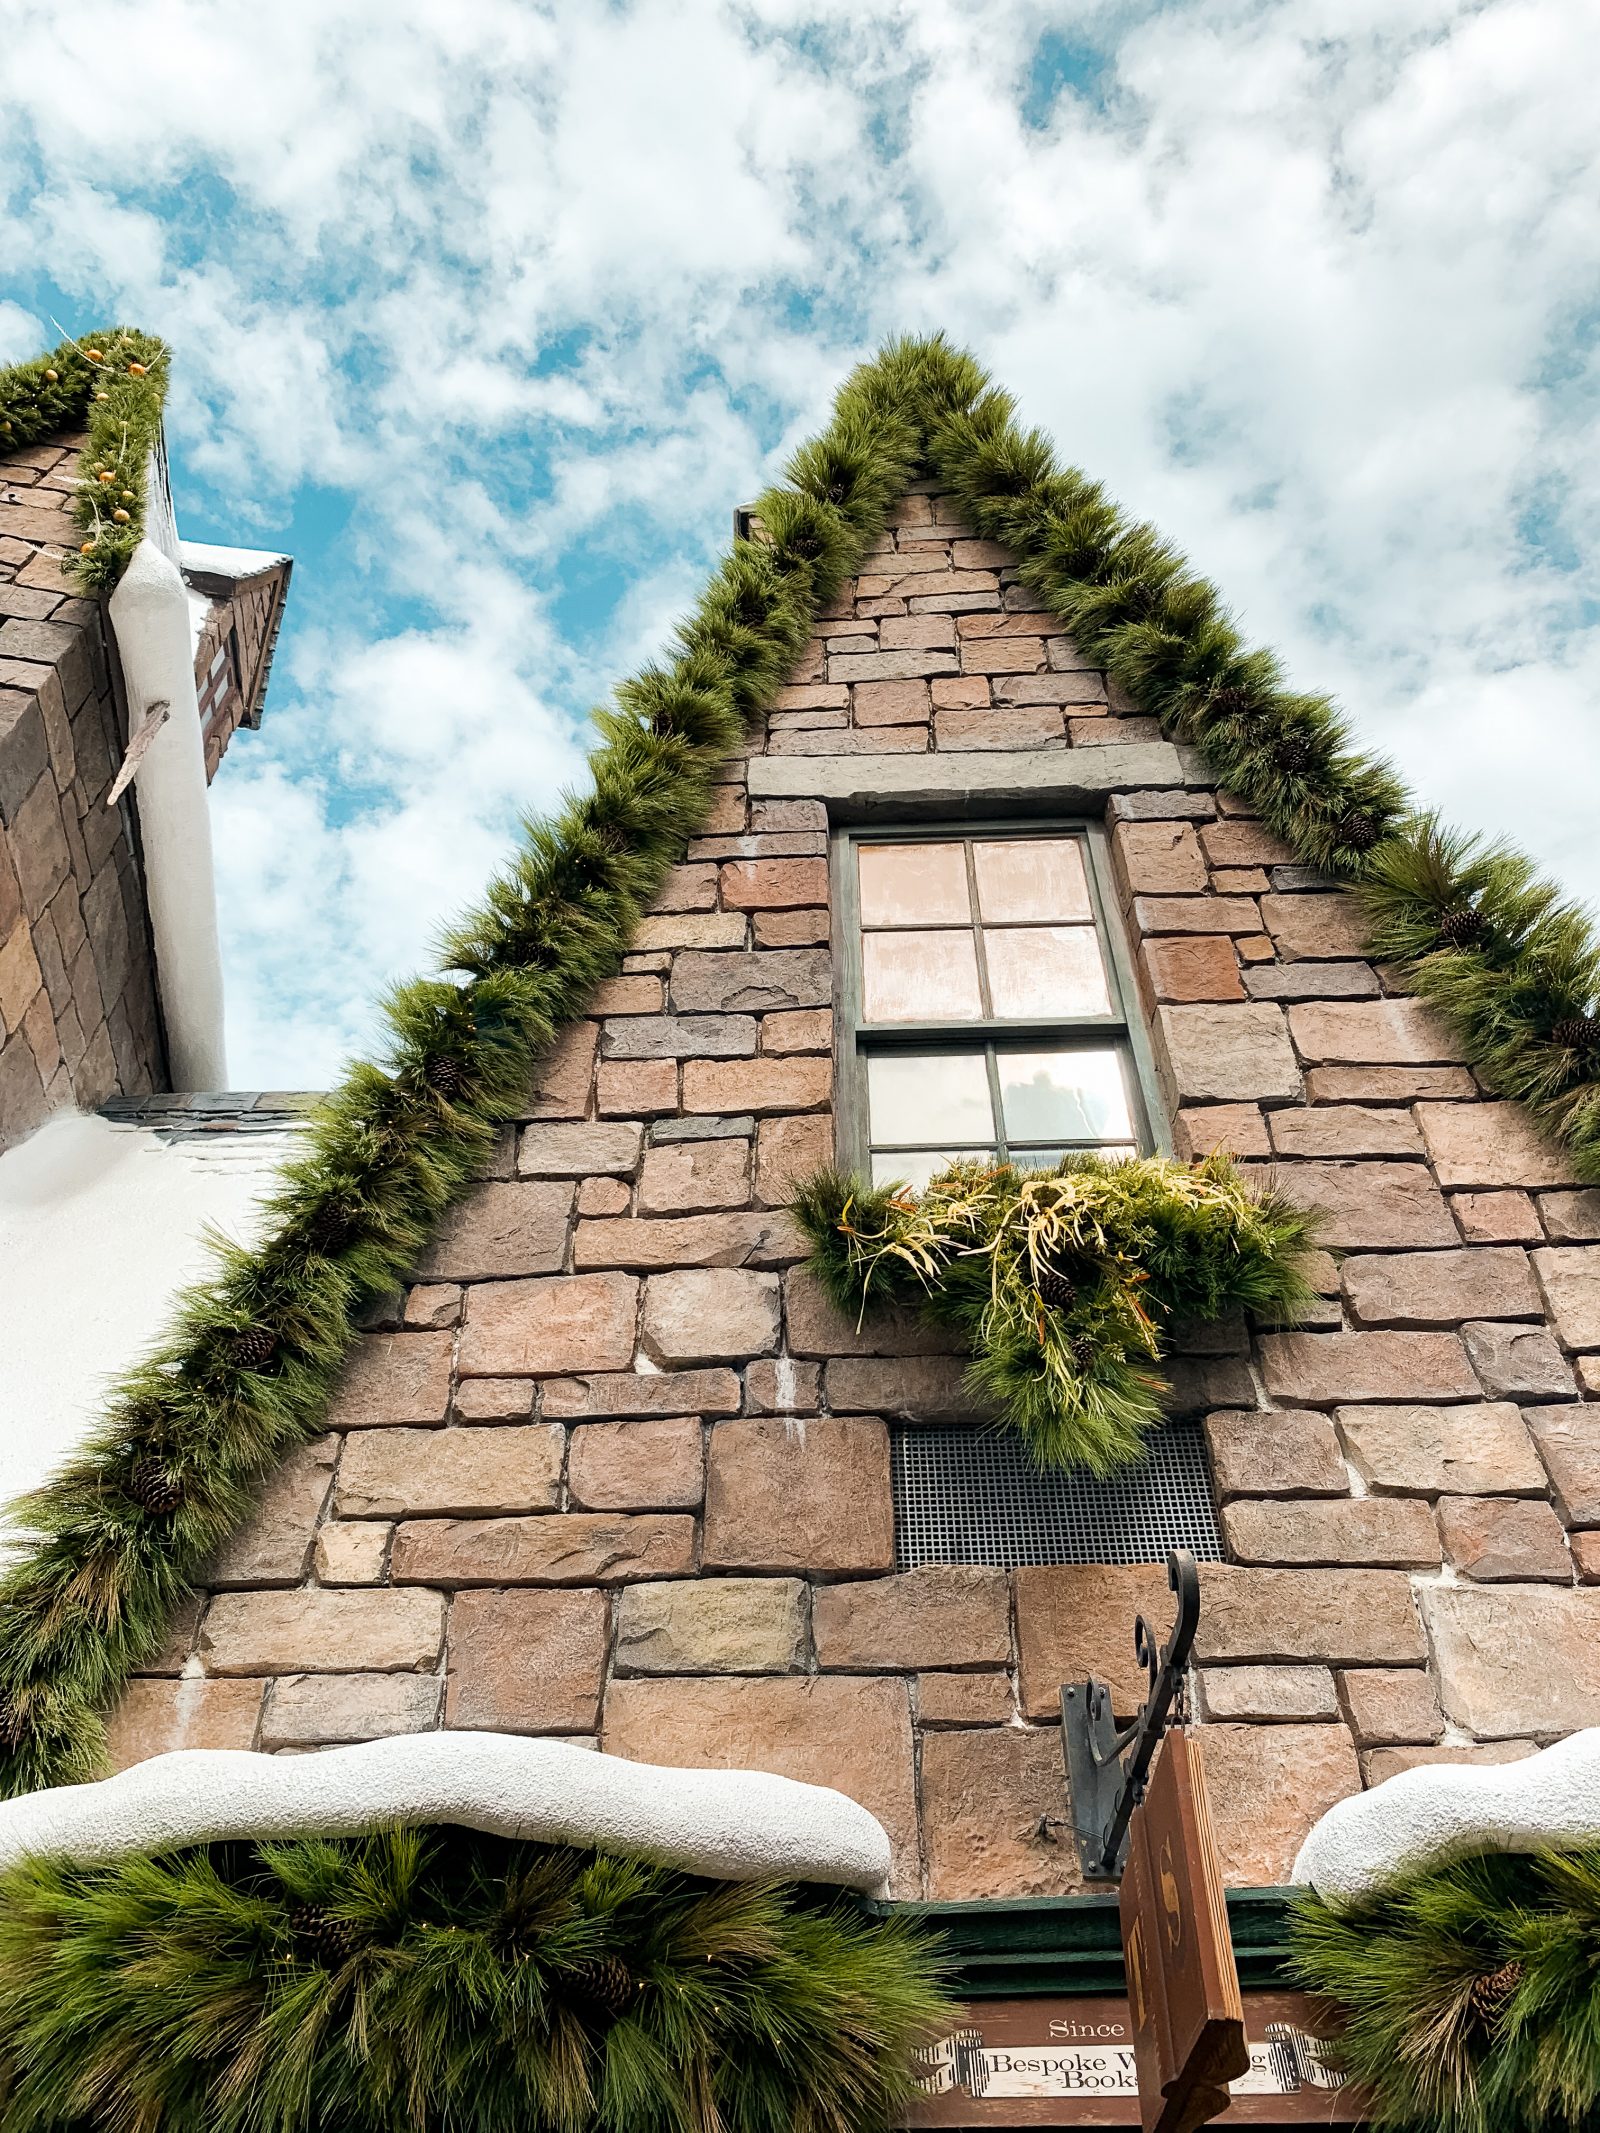 snowy store fronts In Hogmeade Wizarding World of Harry Potter